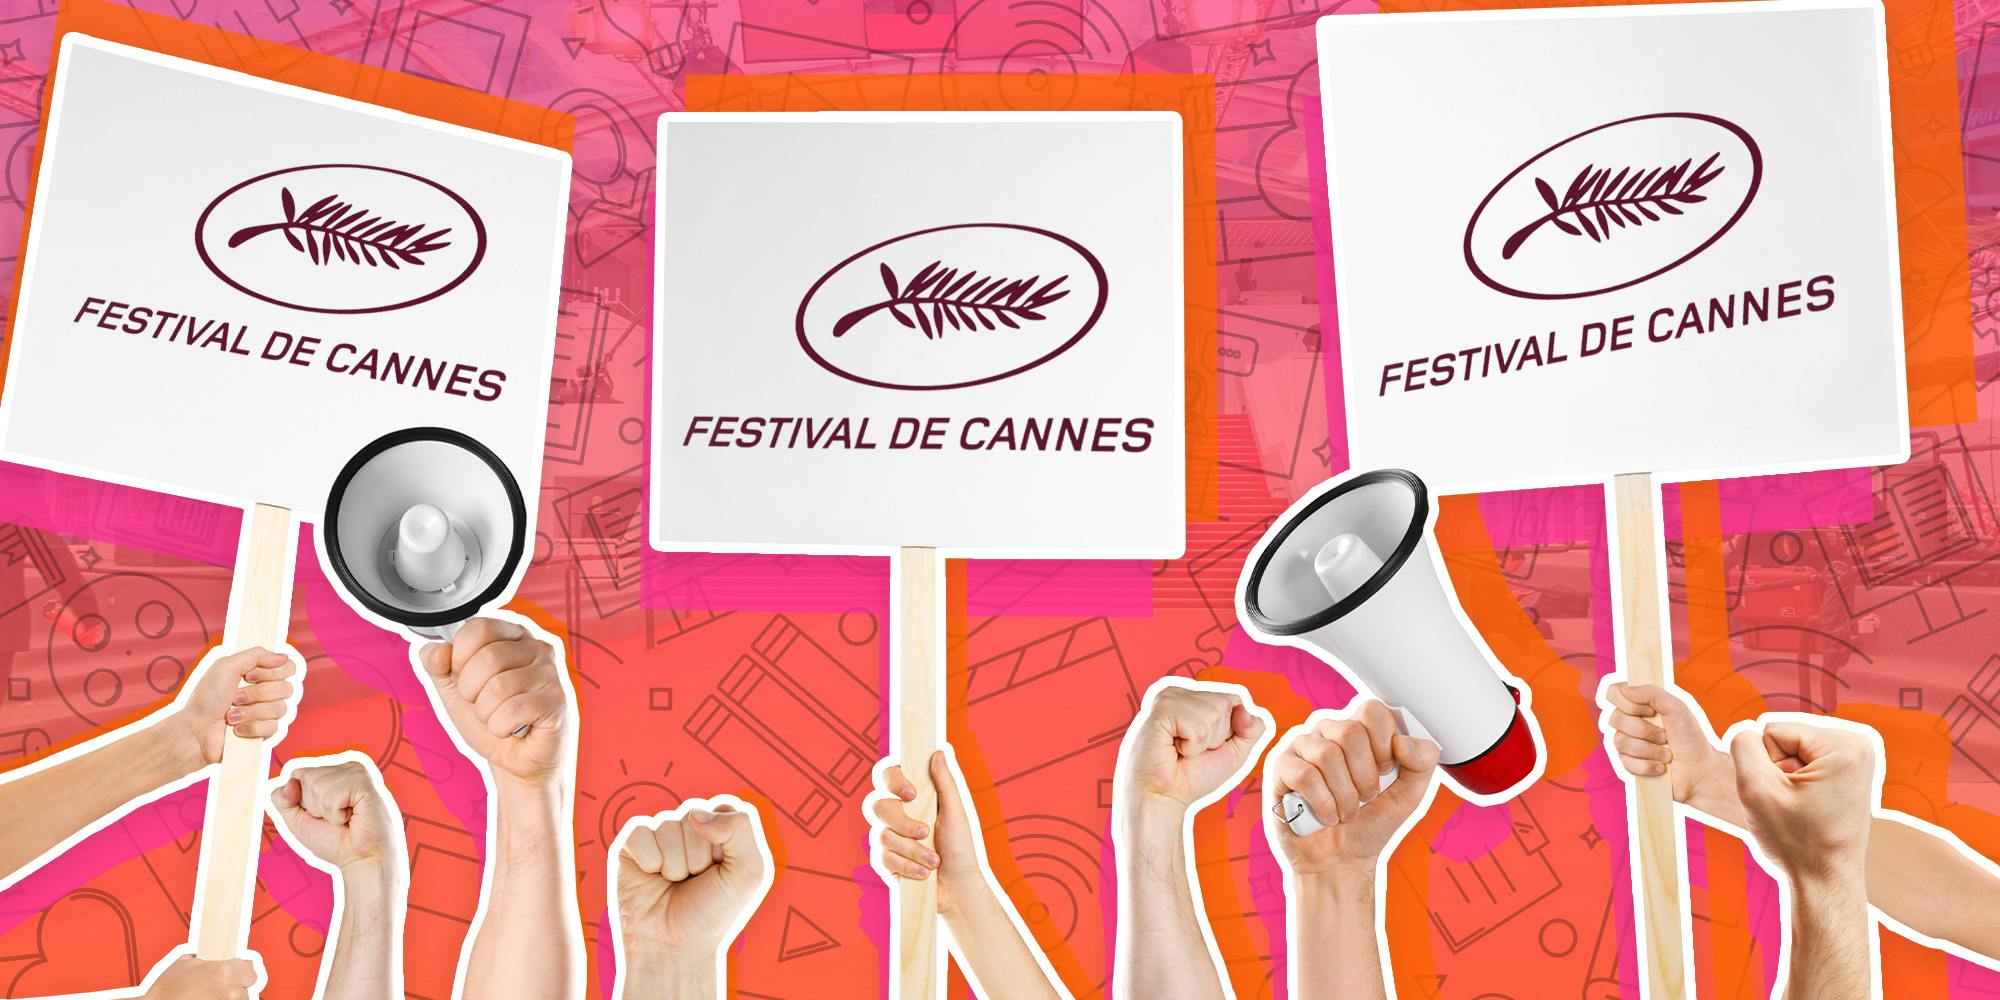 Cannes Film Festival Workers Are Officially on Strike